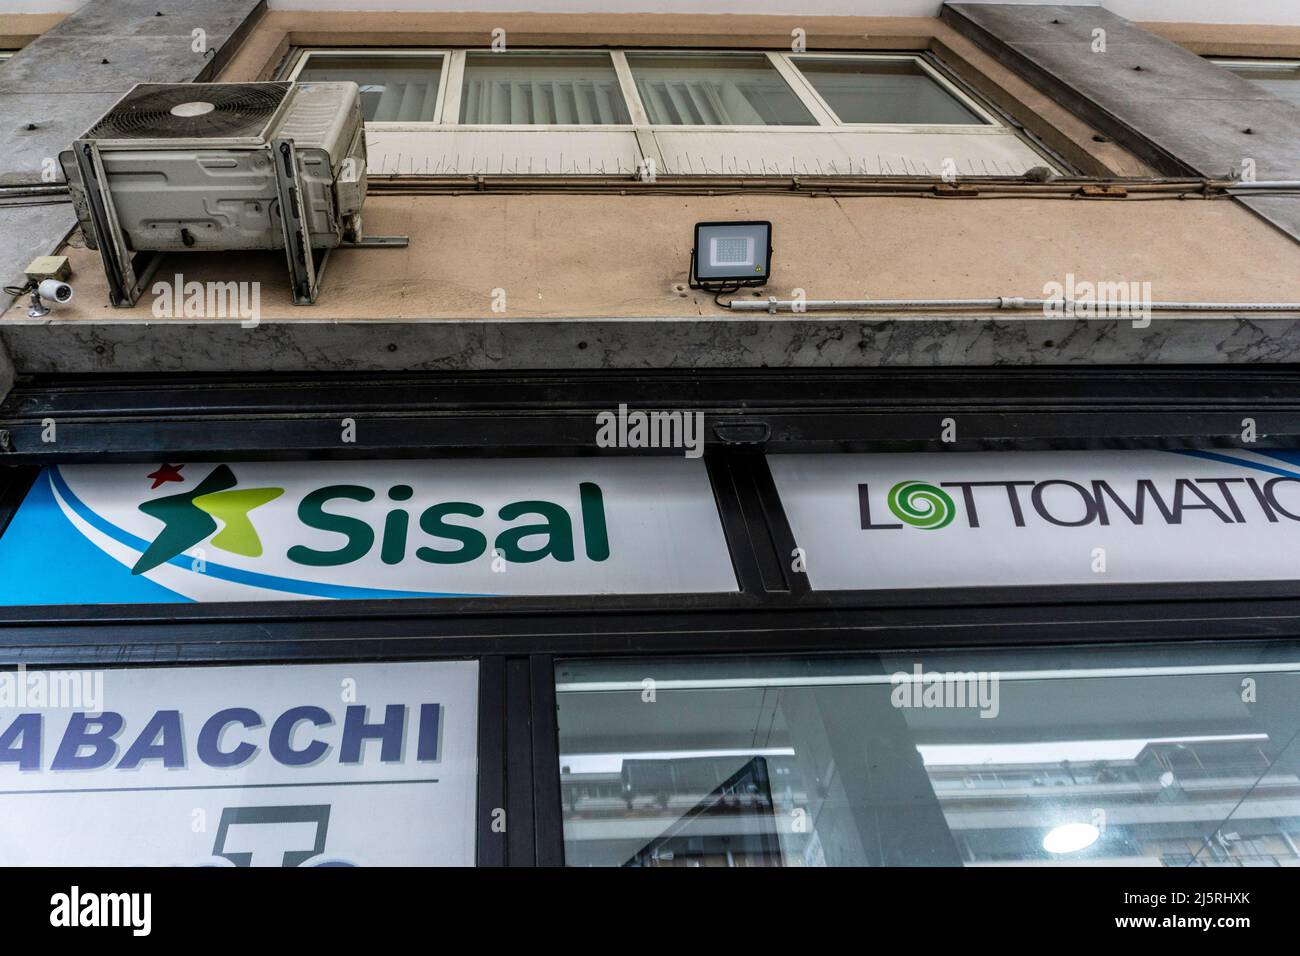 A shop in Palermo, Sicily, Palermo selling lotto products marketed by Sisal, part of the Flutter/Betfair group. Stock Photo